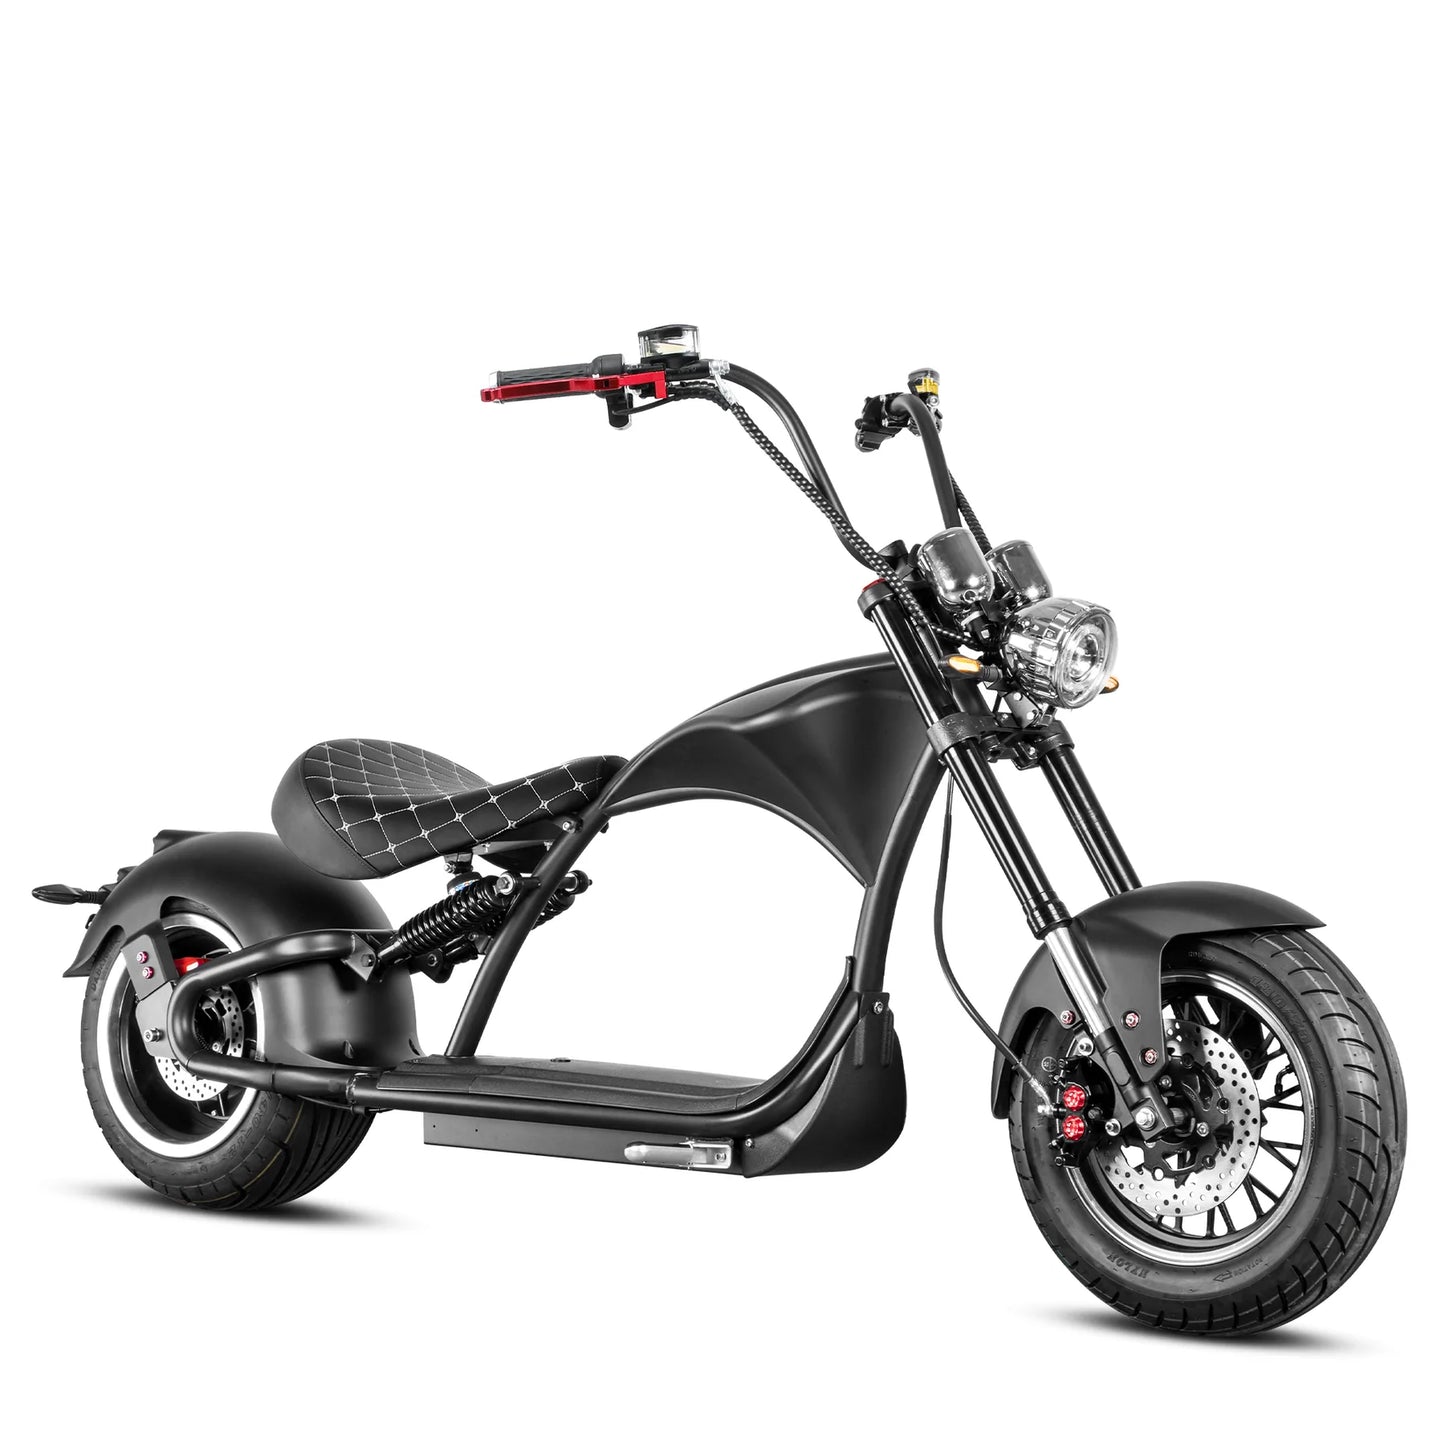 Eahora Emars M1P Electric Scooter - Black | Bike Lover USA